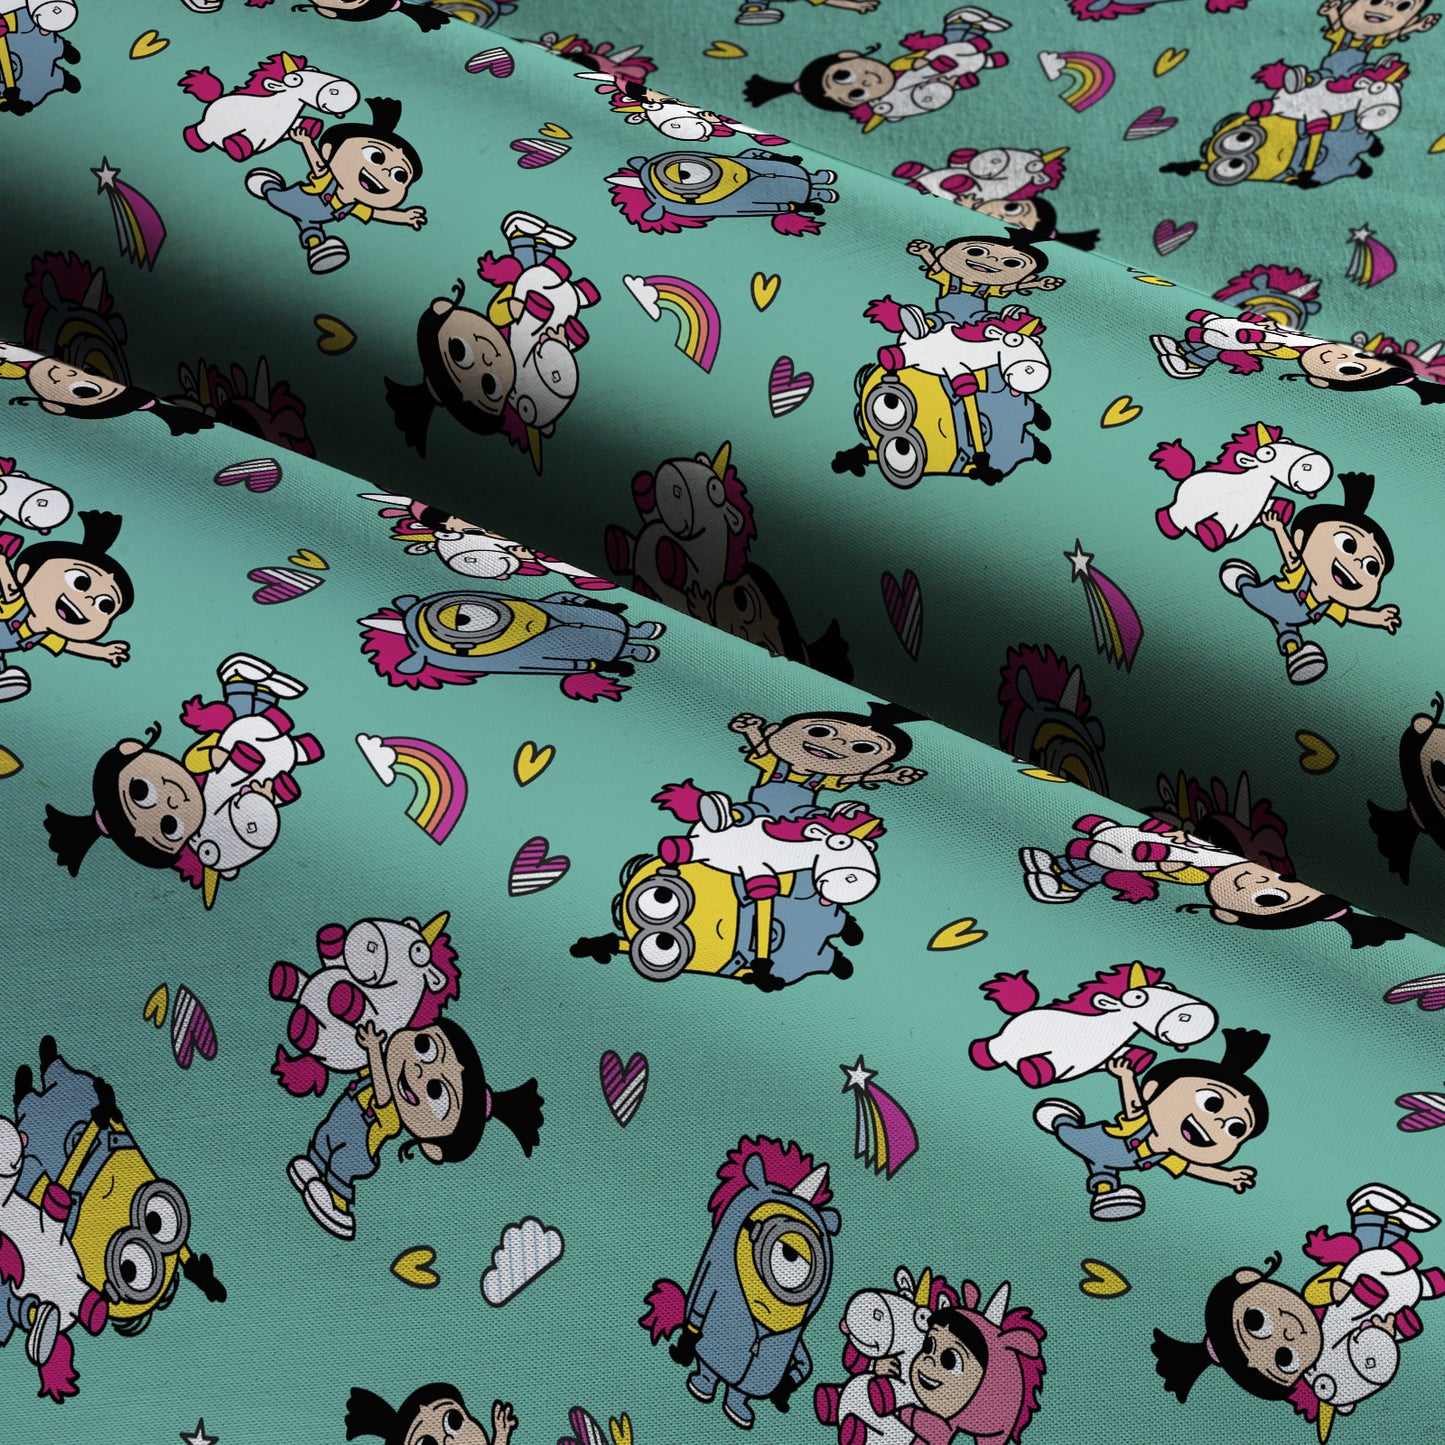 Universal Despicable Me Fluffy Cotton Fabric